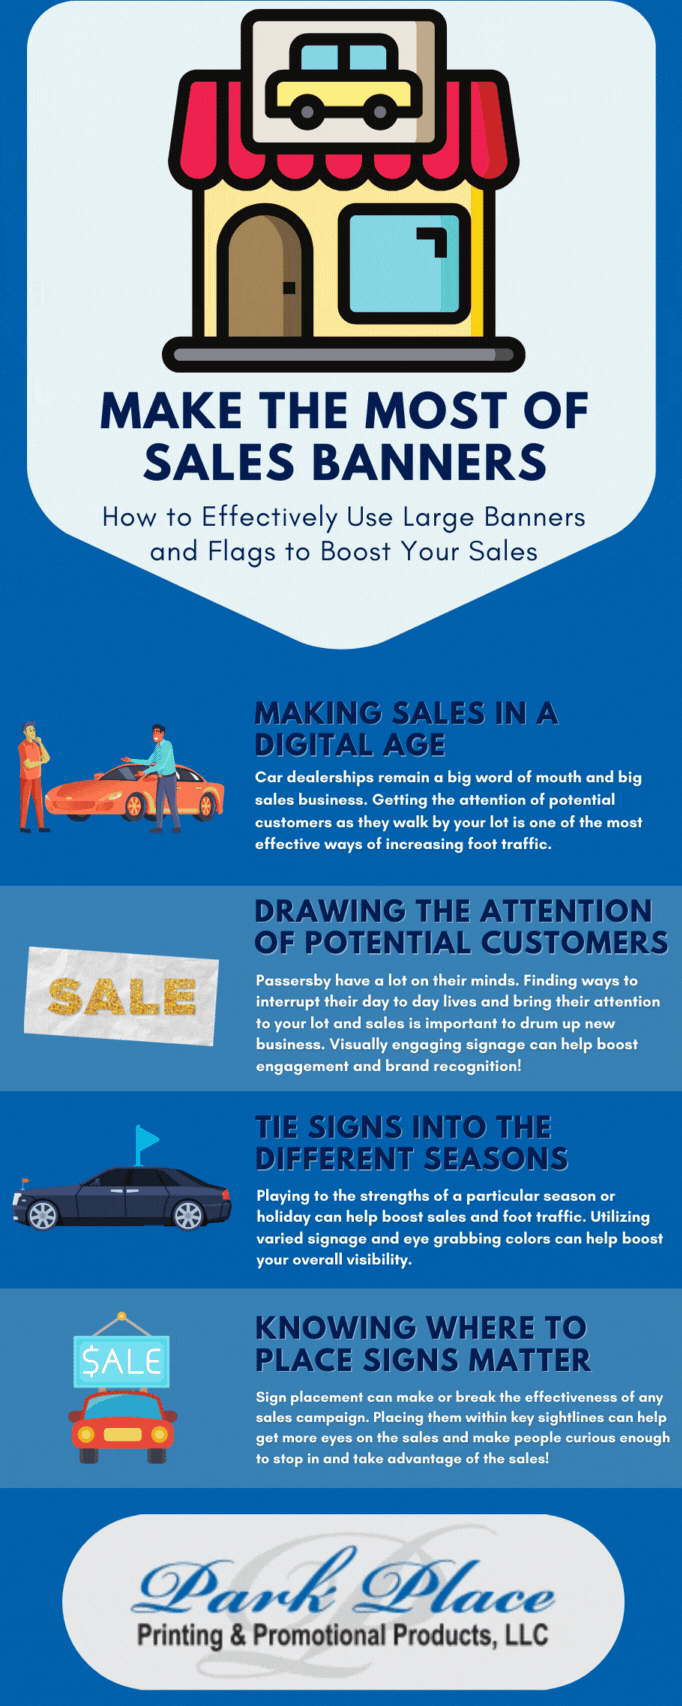 Make the Most of Sales Banners - Infographic